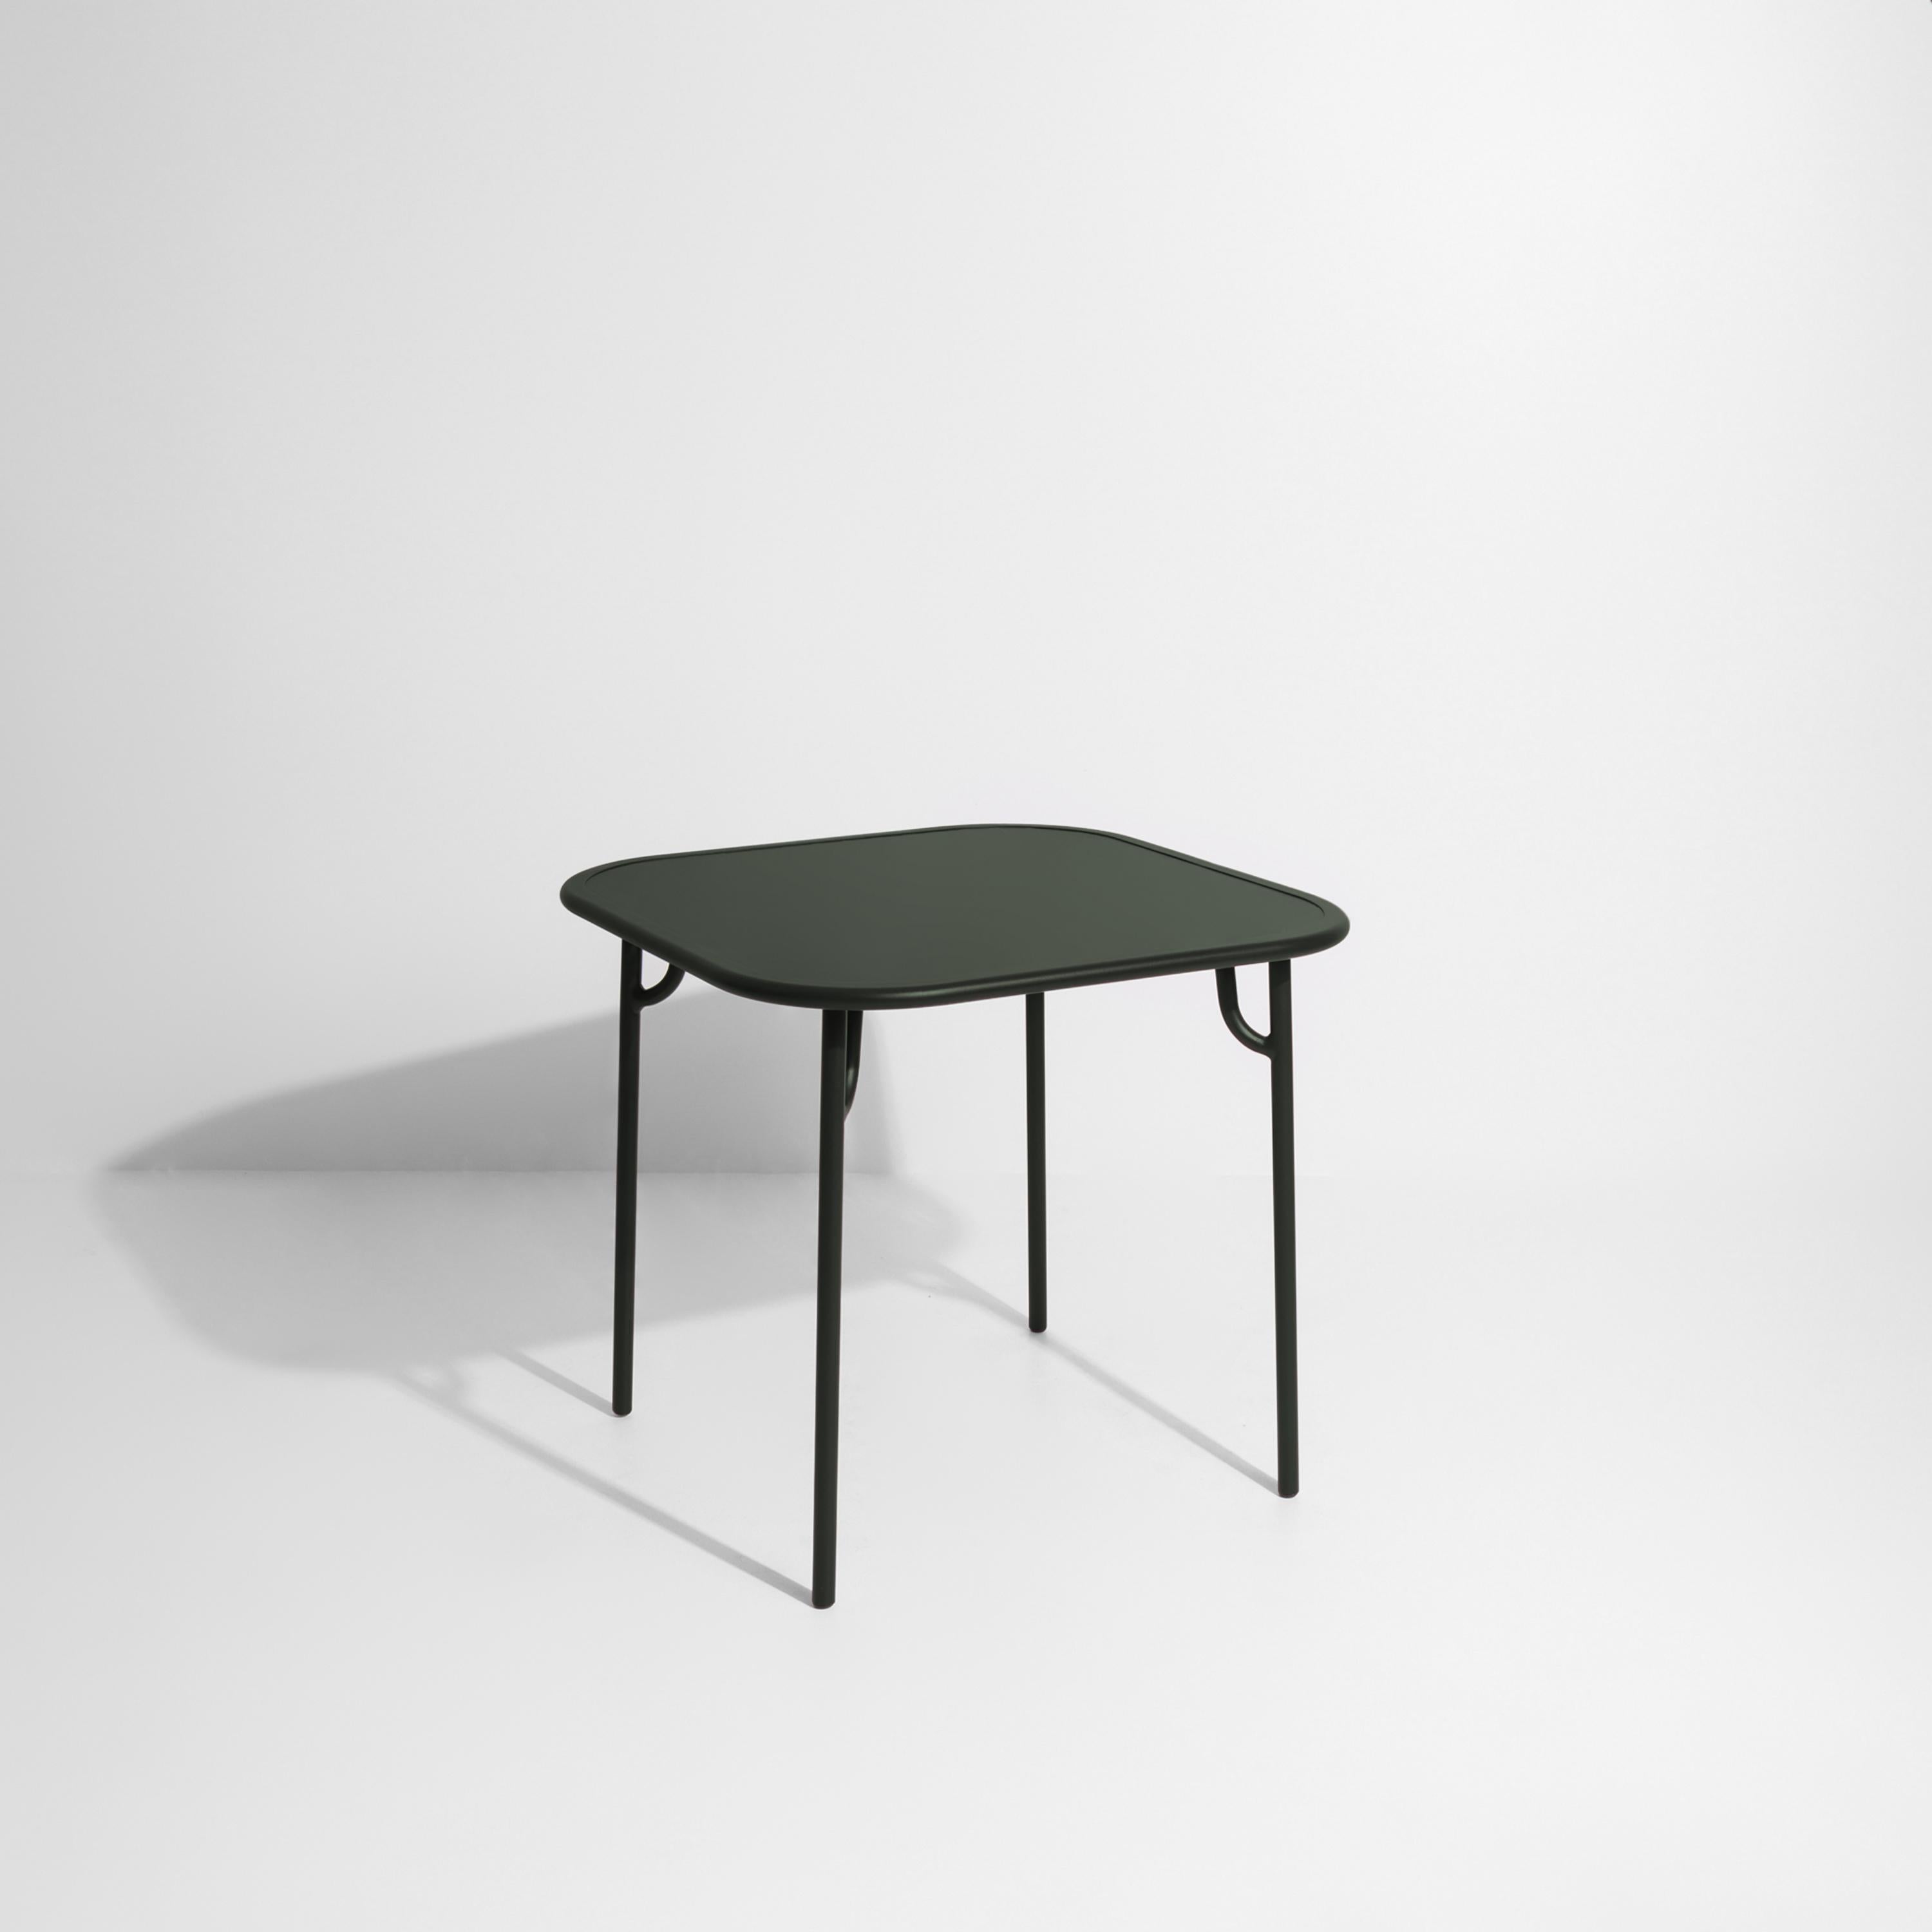 Petite Friture Week-End Plain Square Dining Table in Glass Green Aluminium by Studio BrichetZiegler, 2017

The week-end collection is a full range of outdoor furniture, in aluminium grained epoxy paint, matt finish, that includes 18 functions and